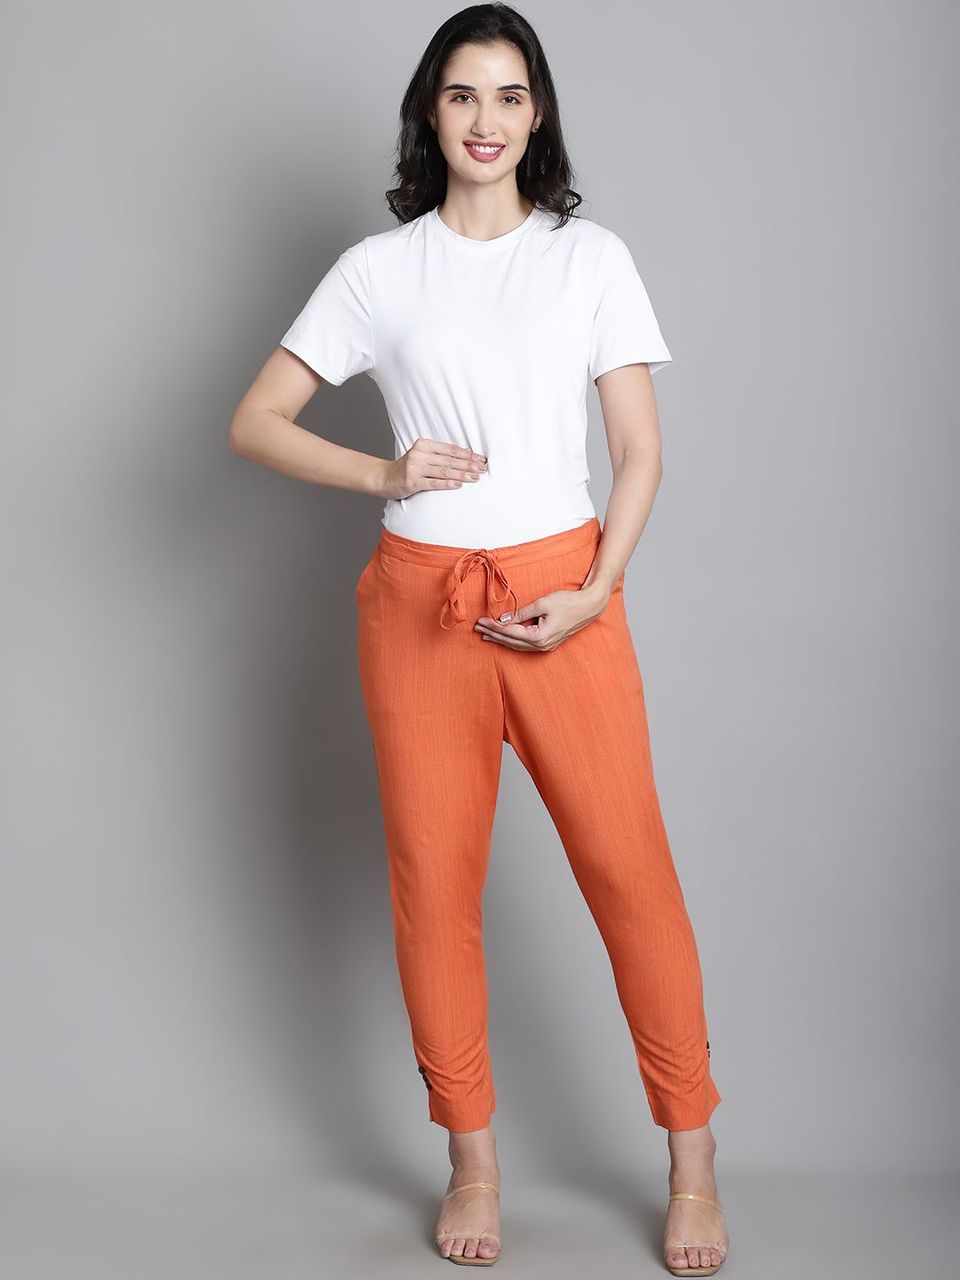 Moms Maternity Solid Orange Sustainable Cotton Ankel Length Maternity Trouser